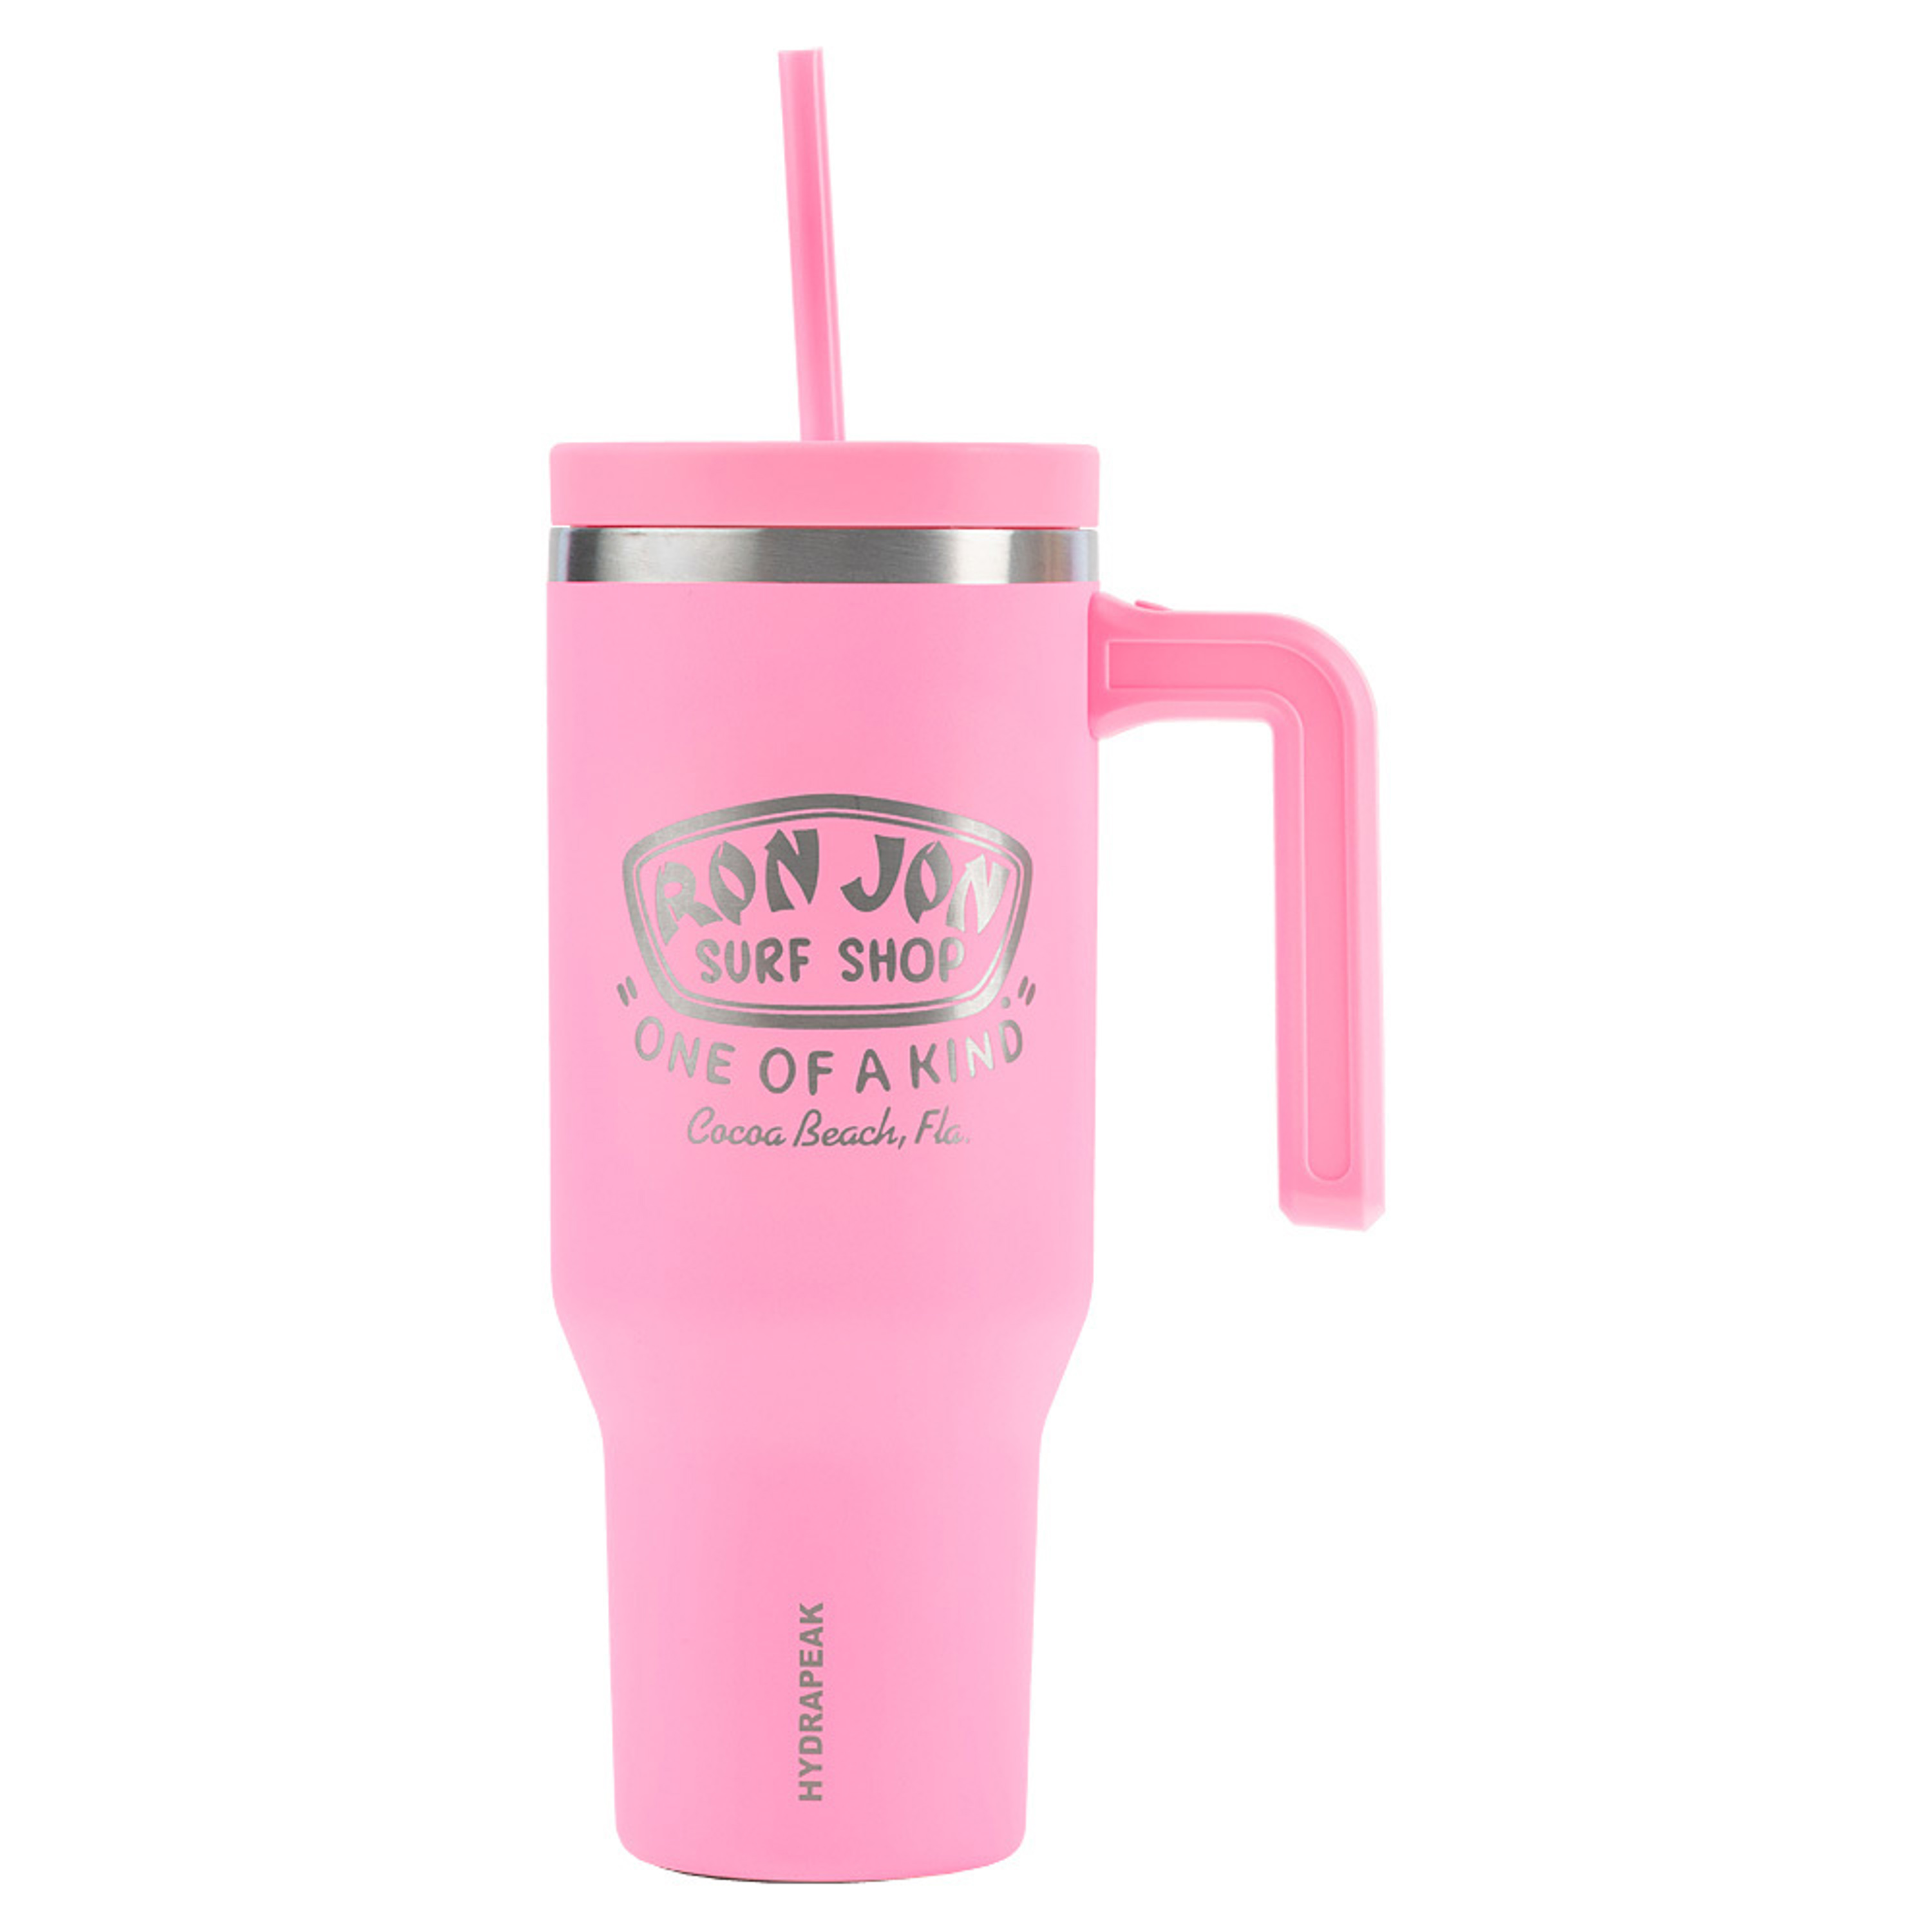 Voyager Kid's 18 oz Tumbler with Handle and Straw Lid - Bubblegum